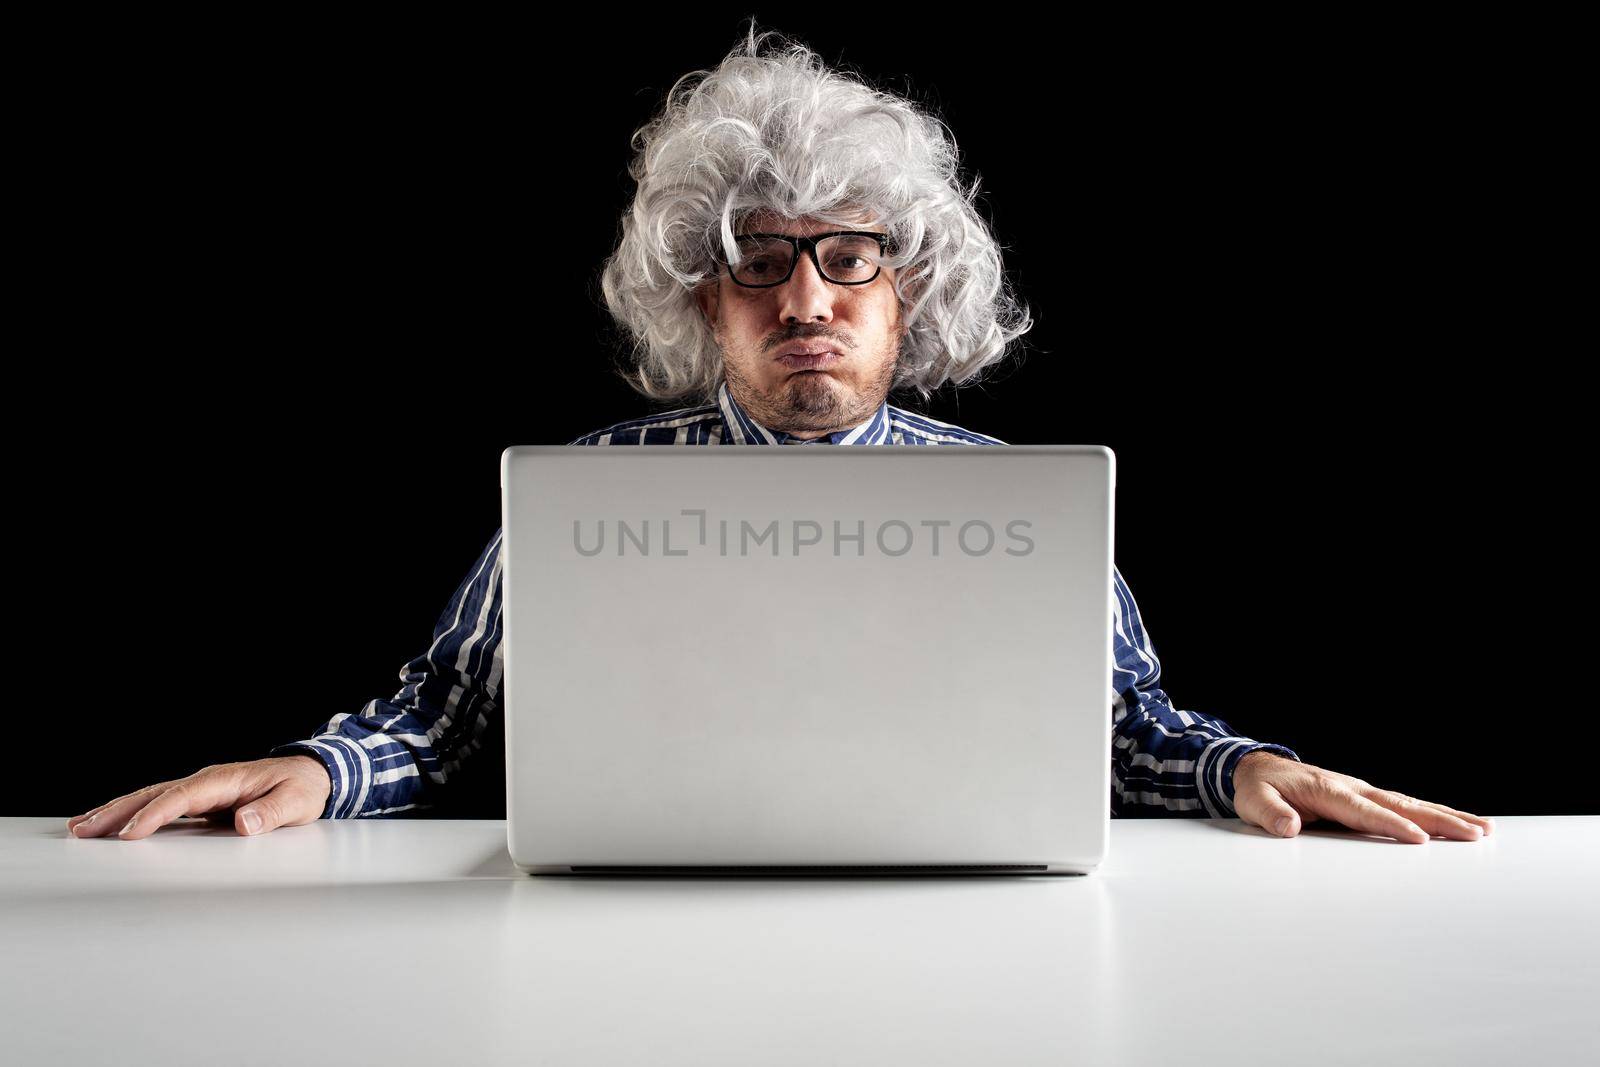 An old man boomer snorting while using computer by bepsimage